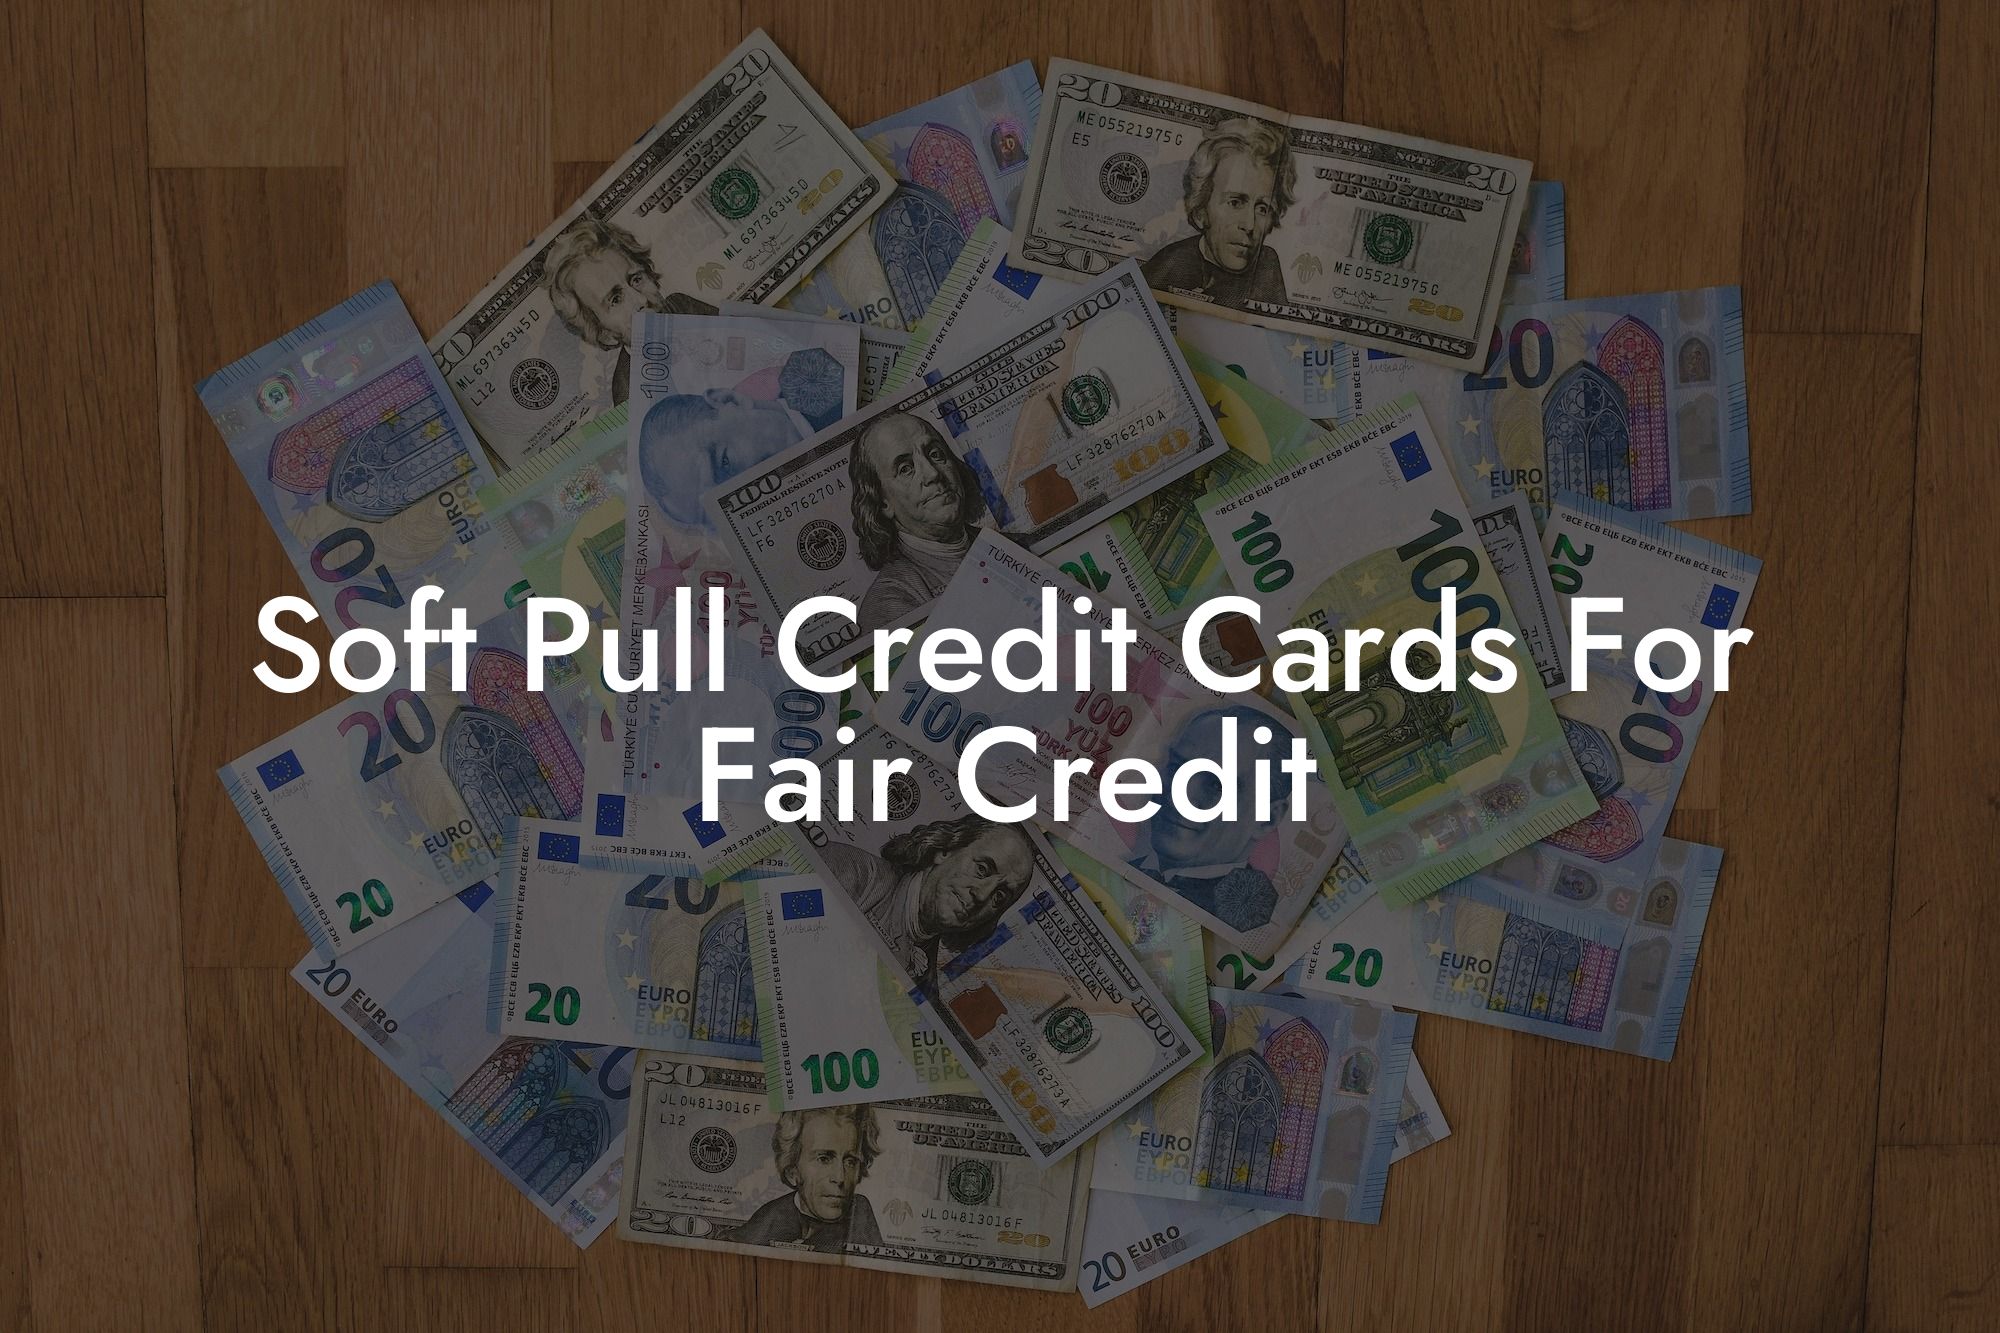 Soft Pull Credit Cards For Fair Credit